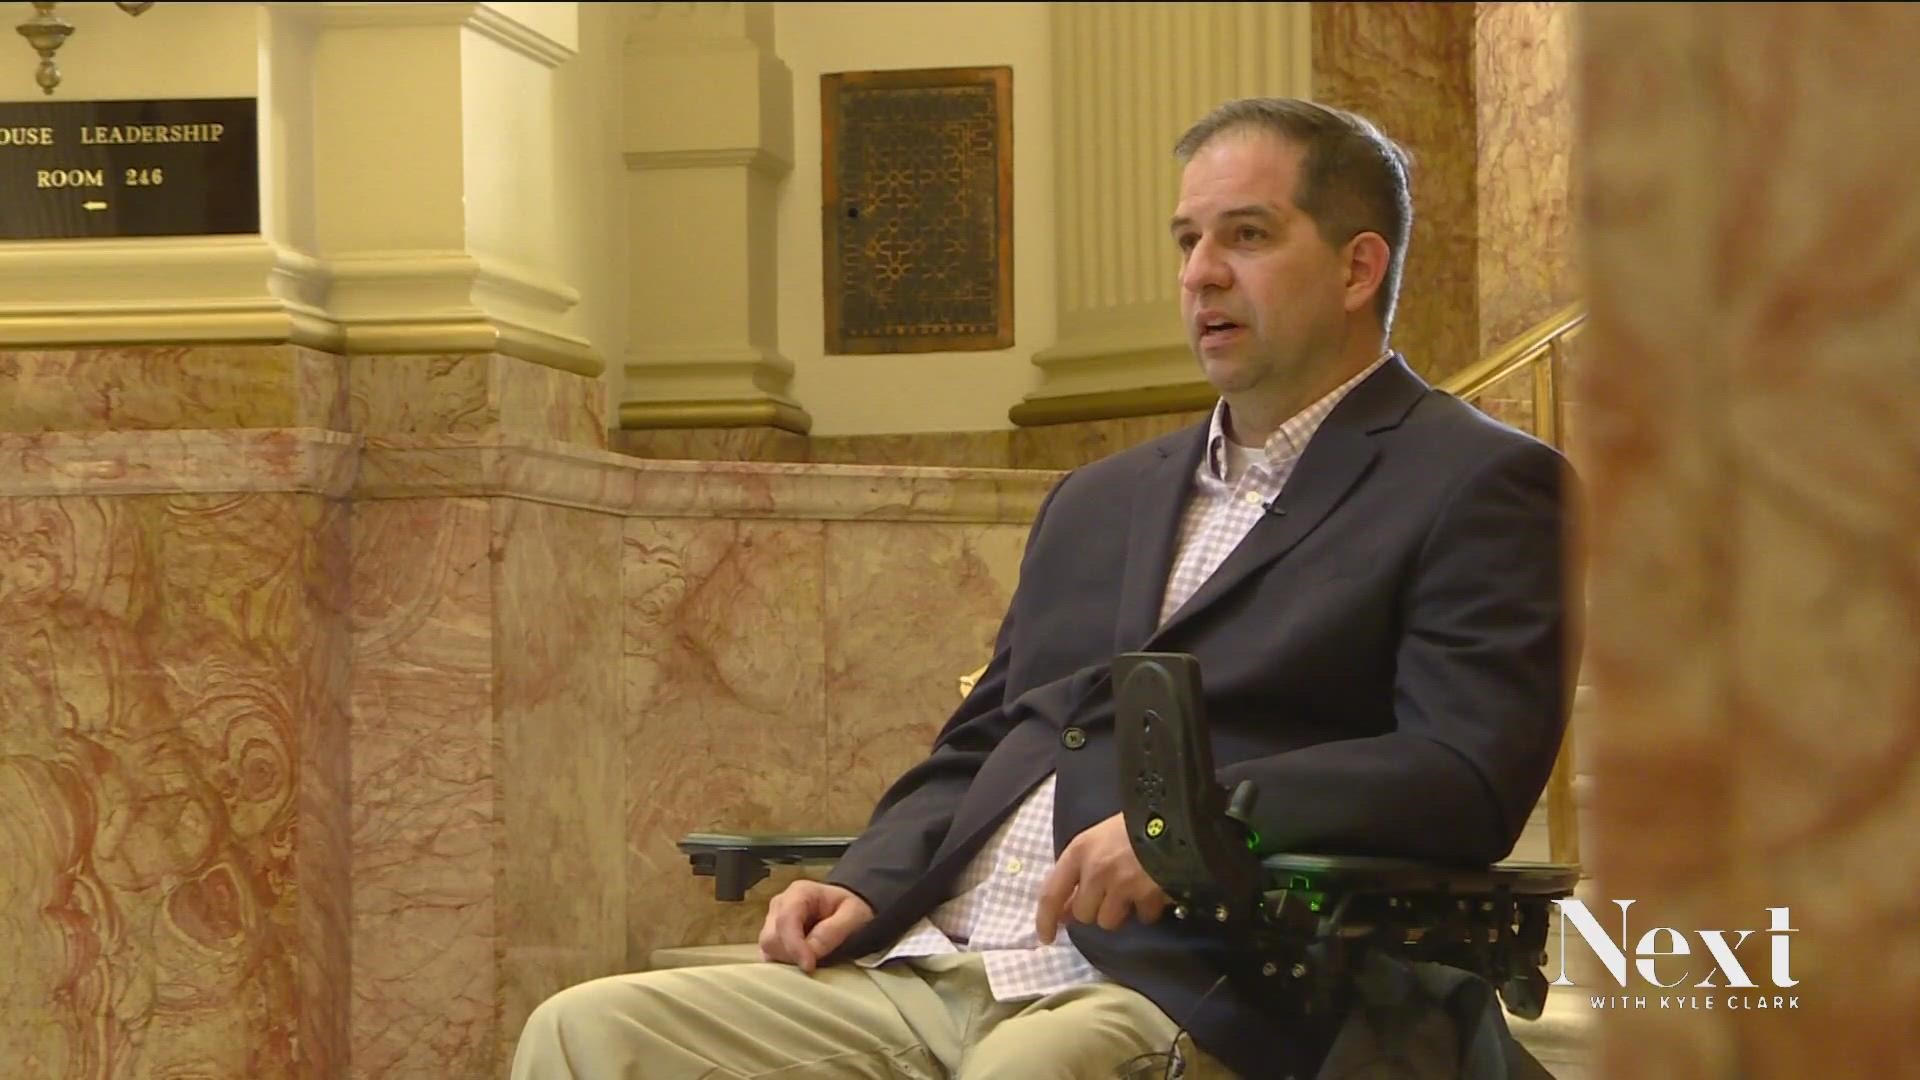 Denver City councilmember for District 10 Chris Hinds, who uses a wheelchair, said debate organizers made him get out of his wheelchair and crawl onto the stage.